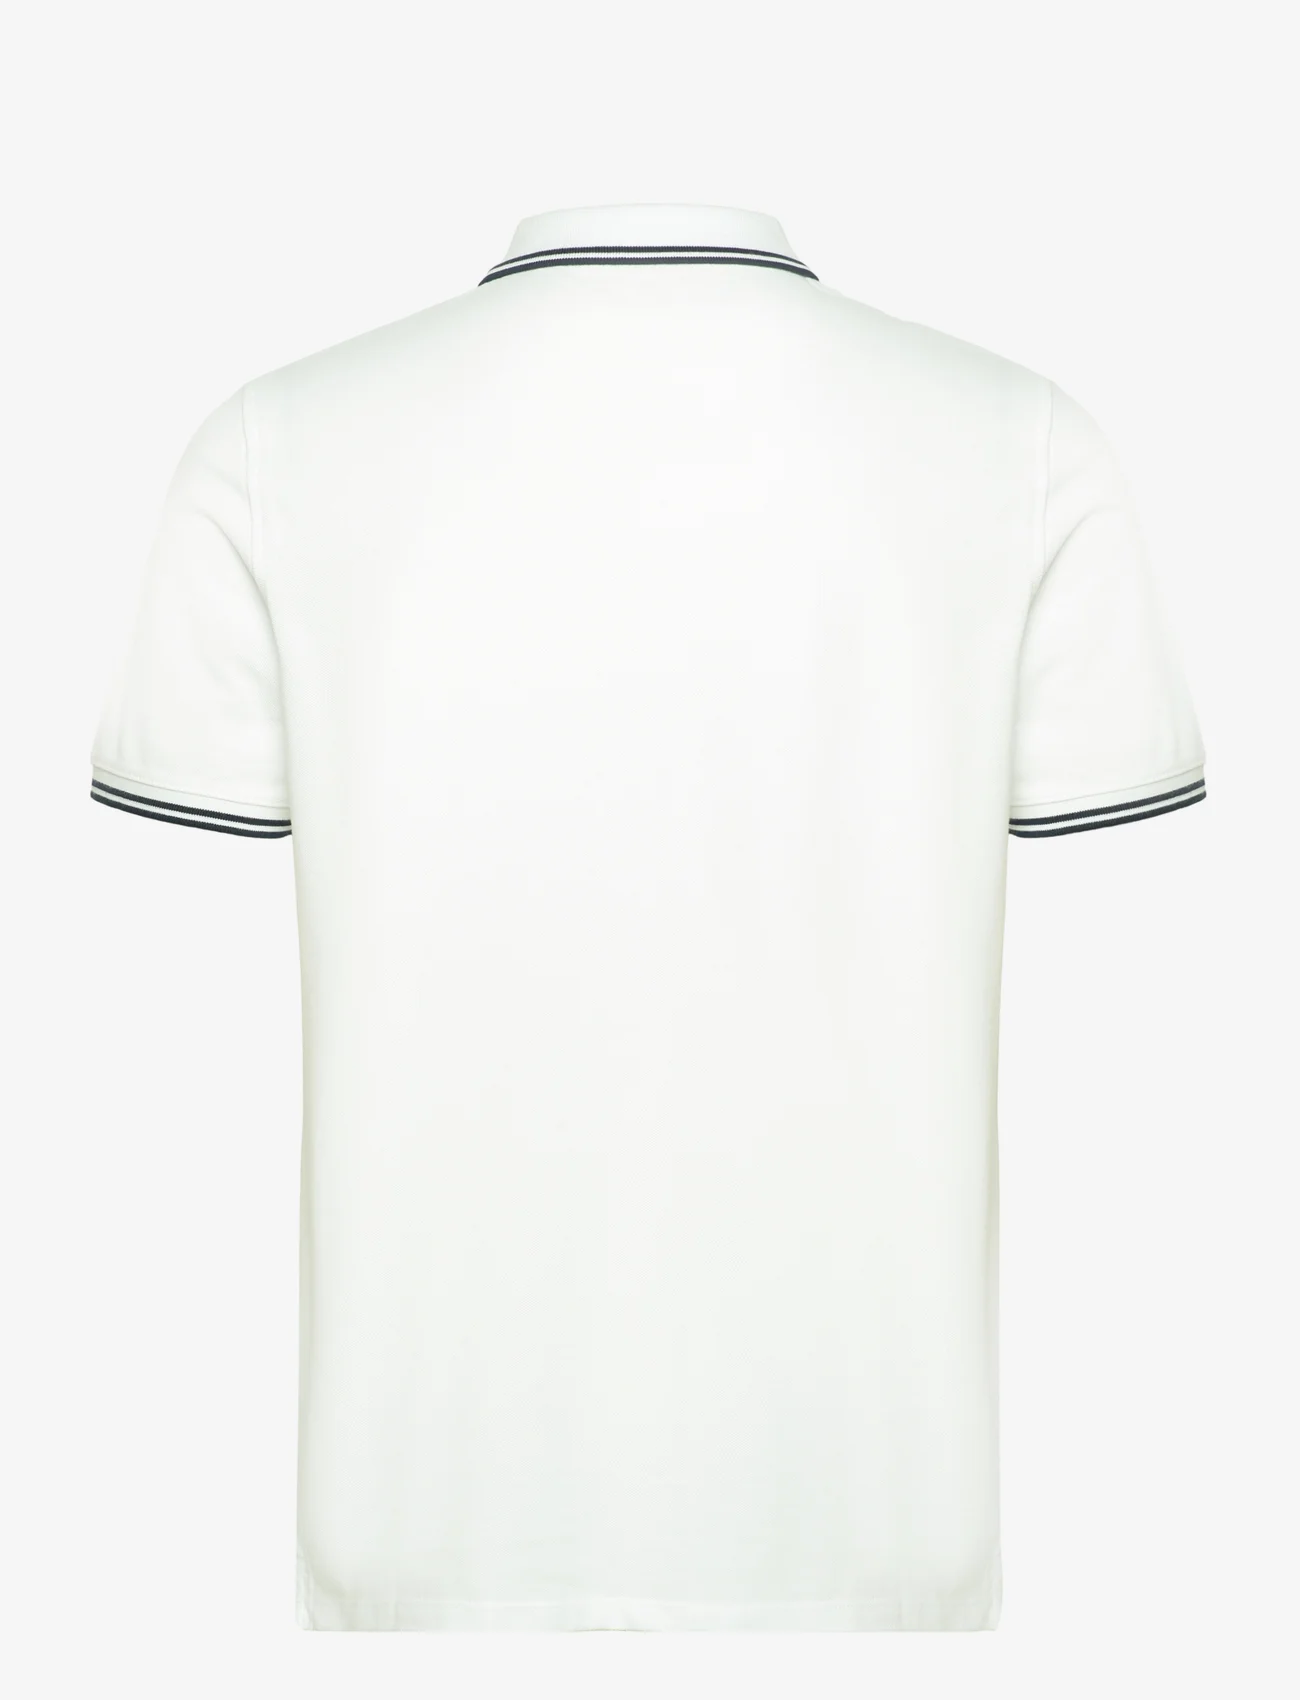 Timberland - MILLERS RIVER Tipped Pique Short Sleeve Polo WHITE - short-sleeved polos - white - 1